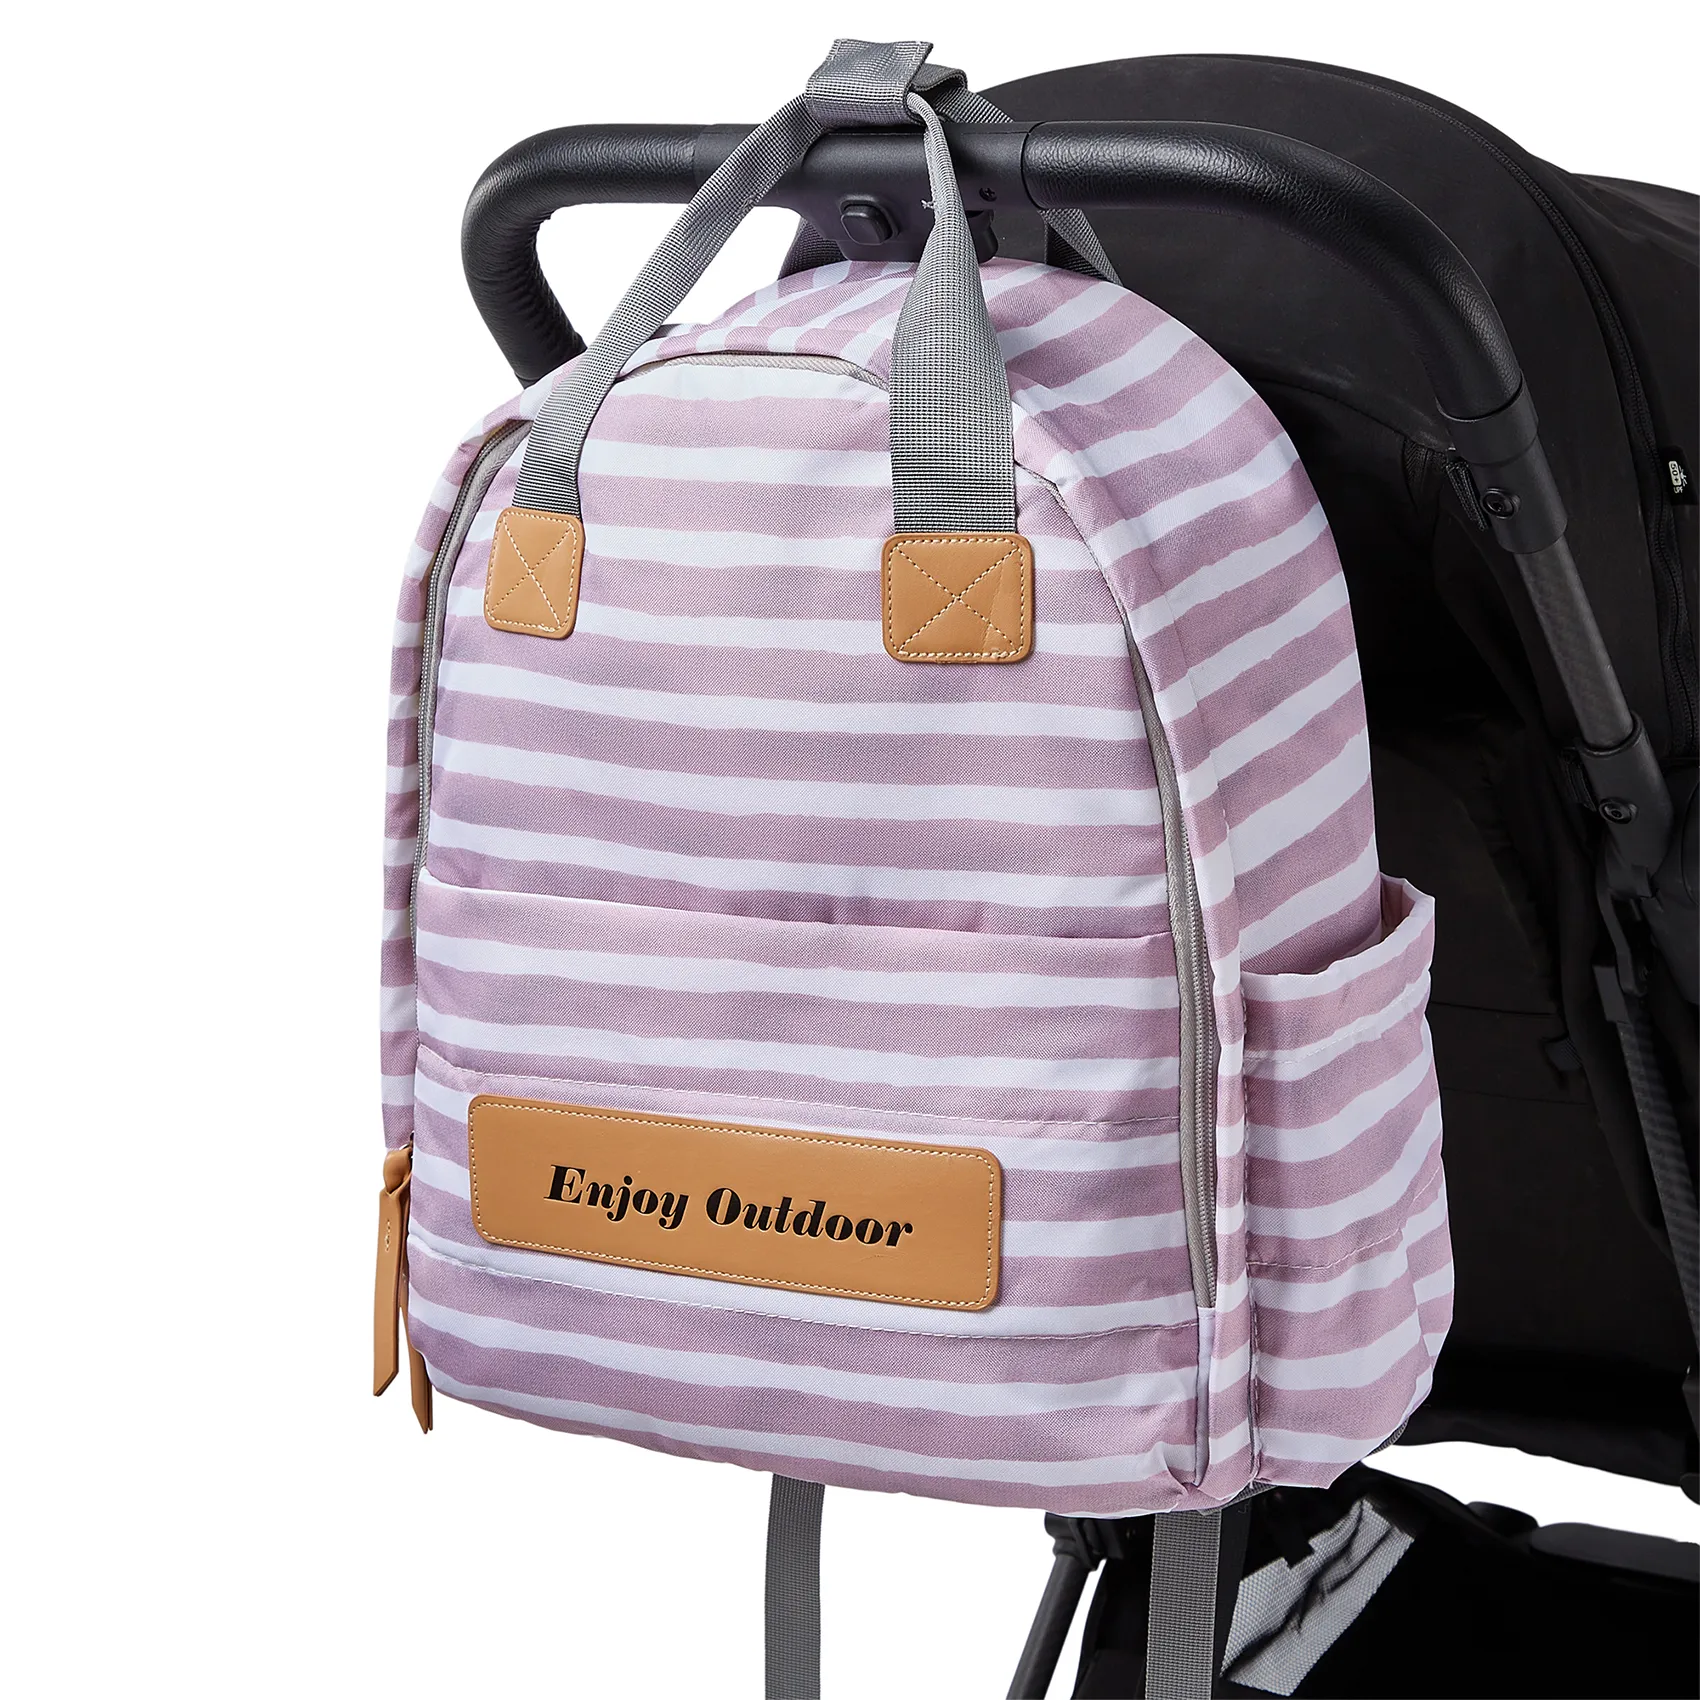 Multi-functional And Waterproof Mommy Backpack With Large Capacity For Diapering Essentials And Leisure